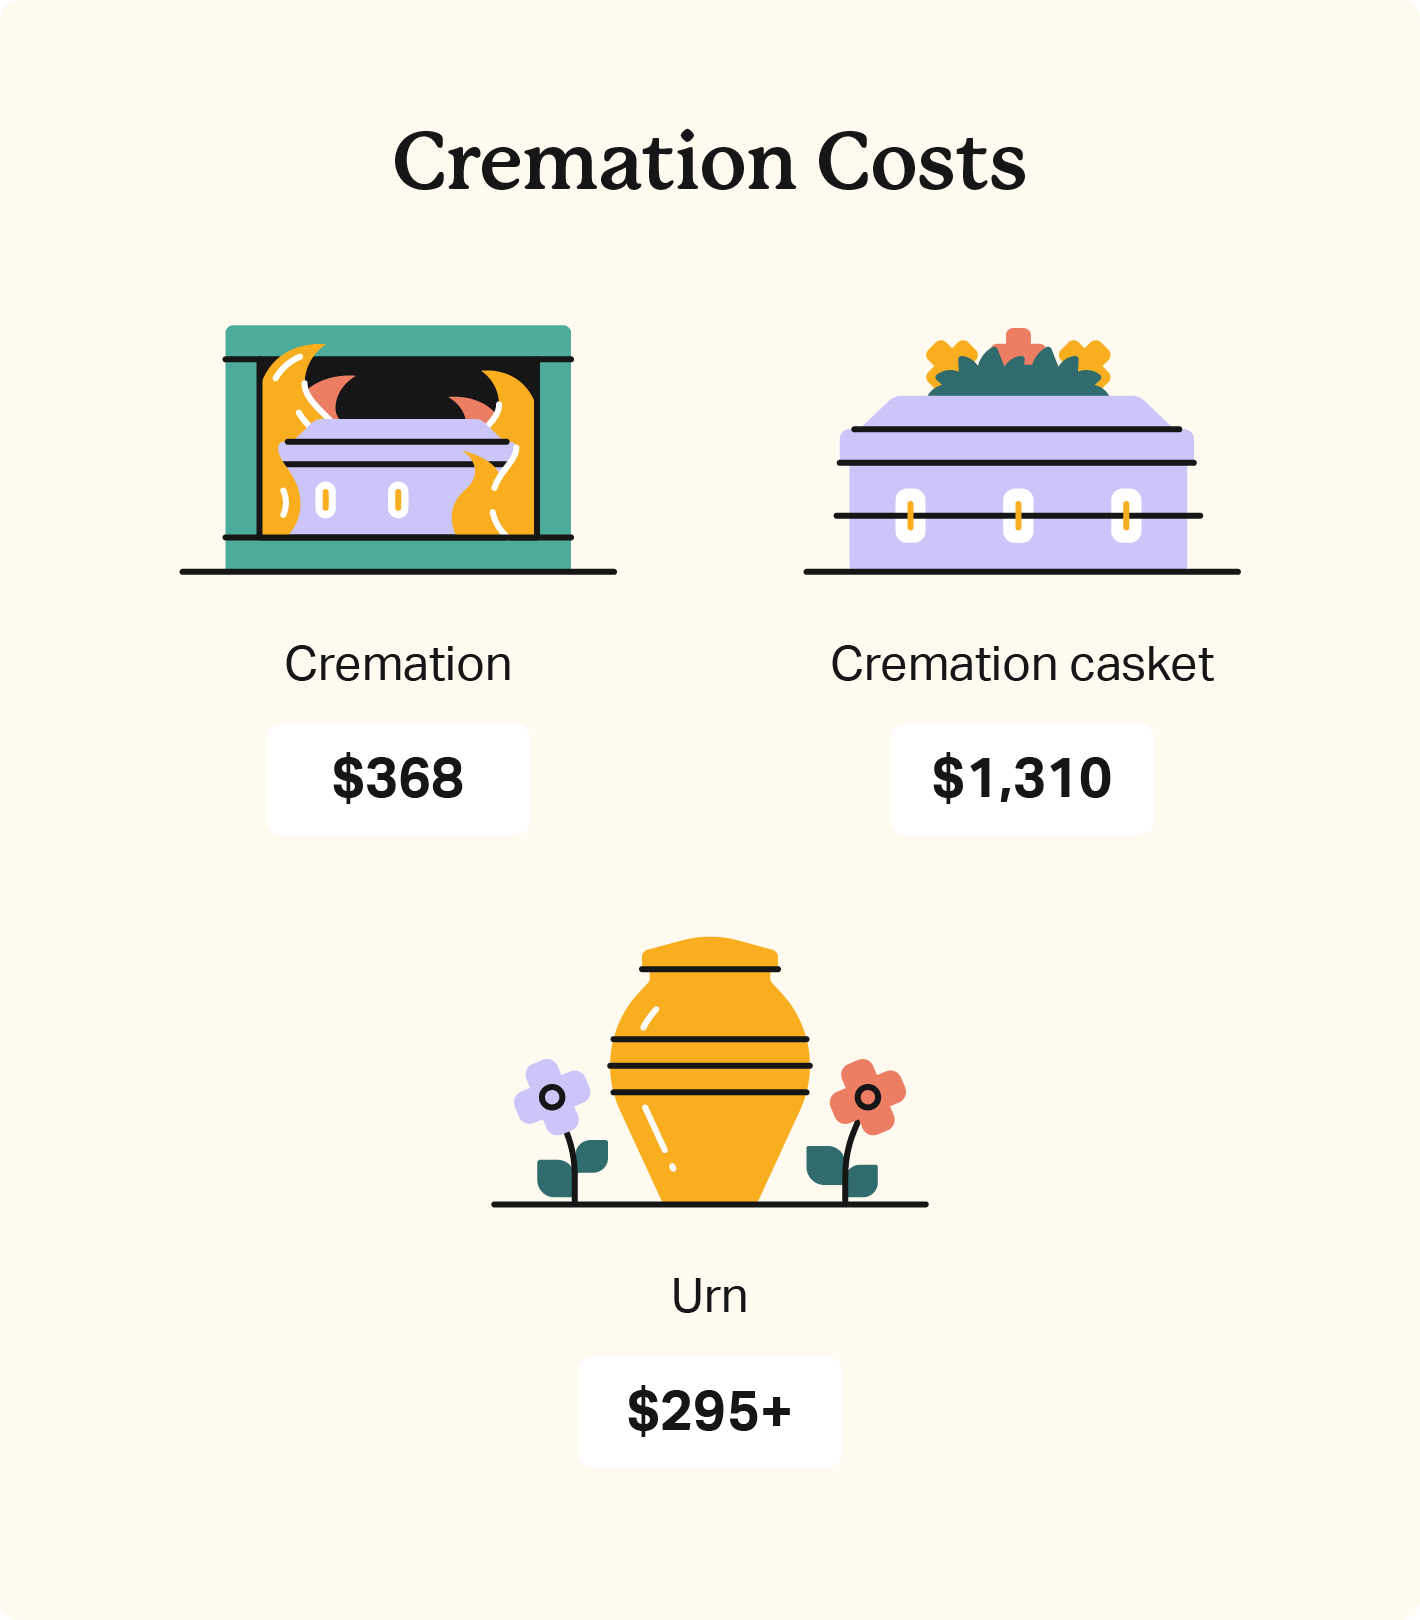 Illustrated icons represent cremation costs, including the process ($368), cremation casket ($1,310), and urn ($295+).